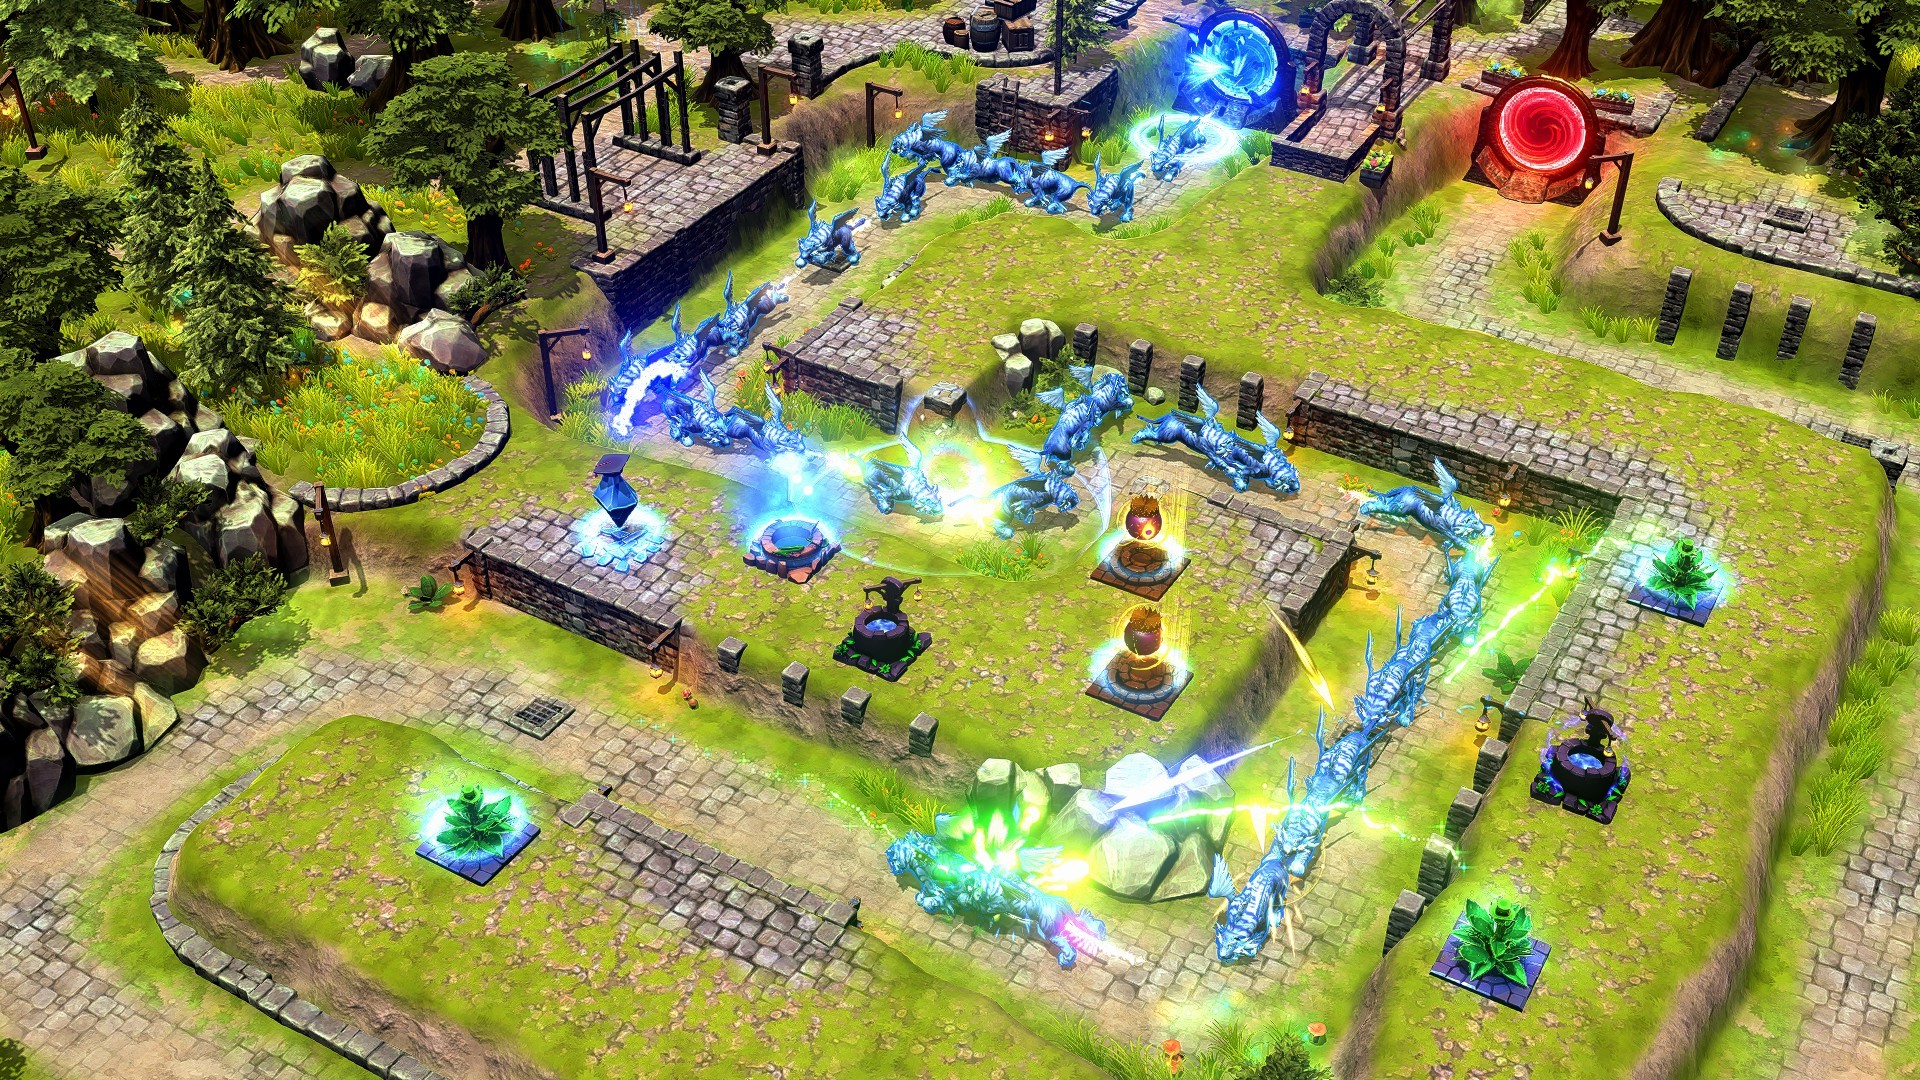 Find the best laptops for Element TD 2 - Tower Defense